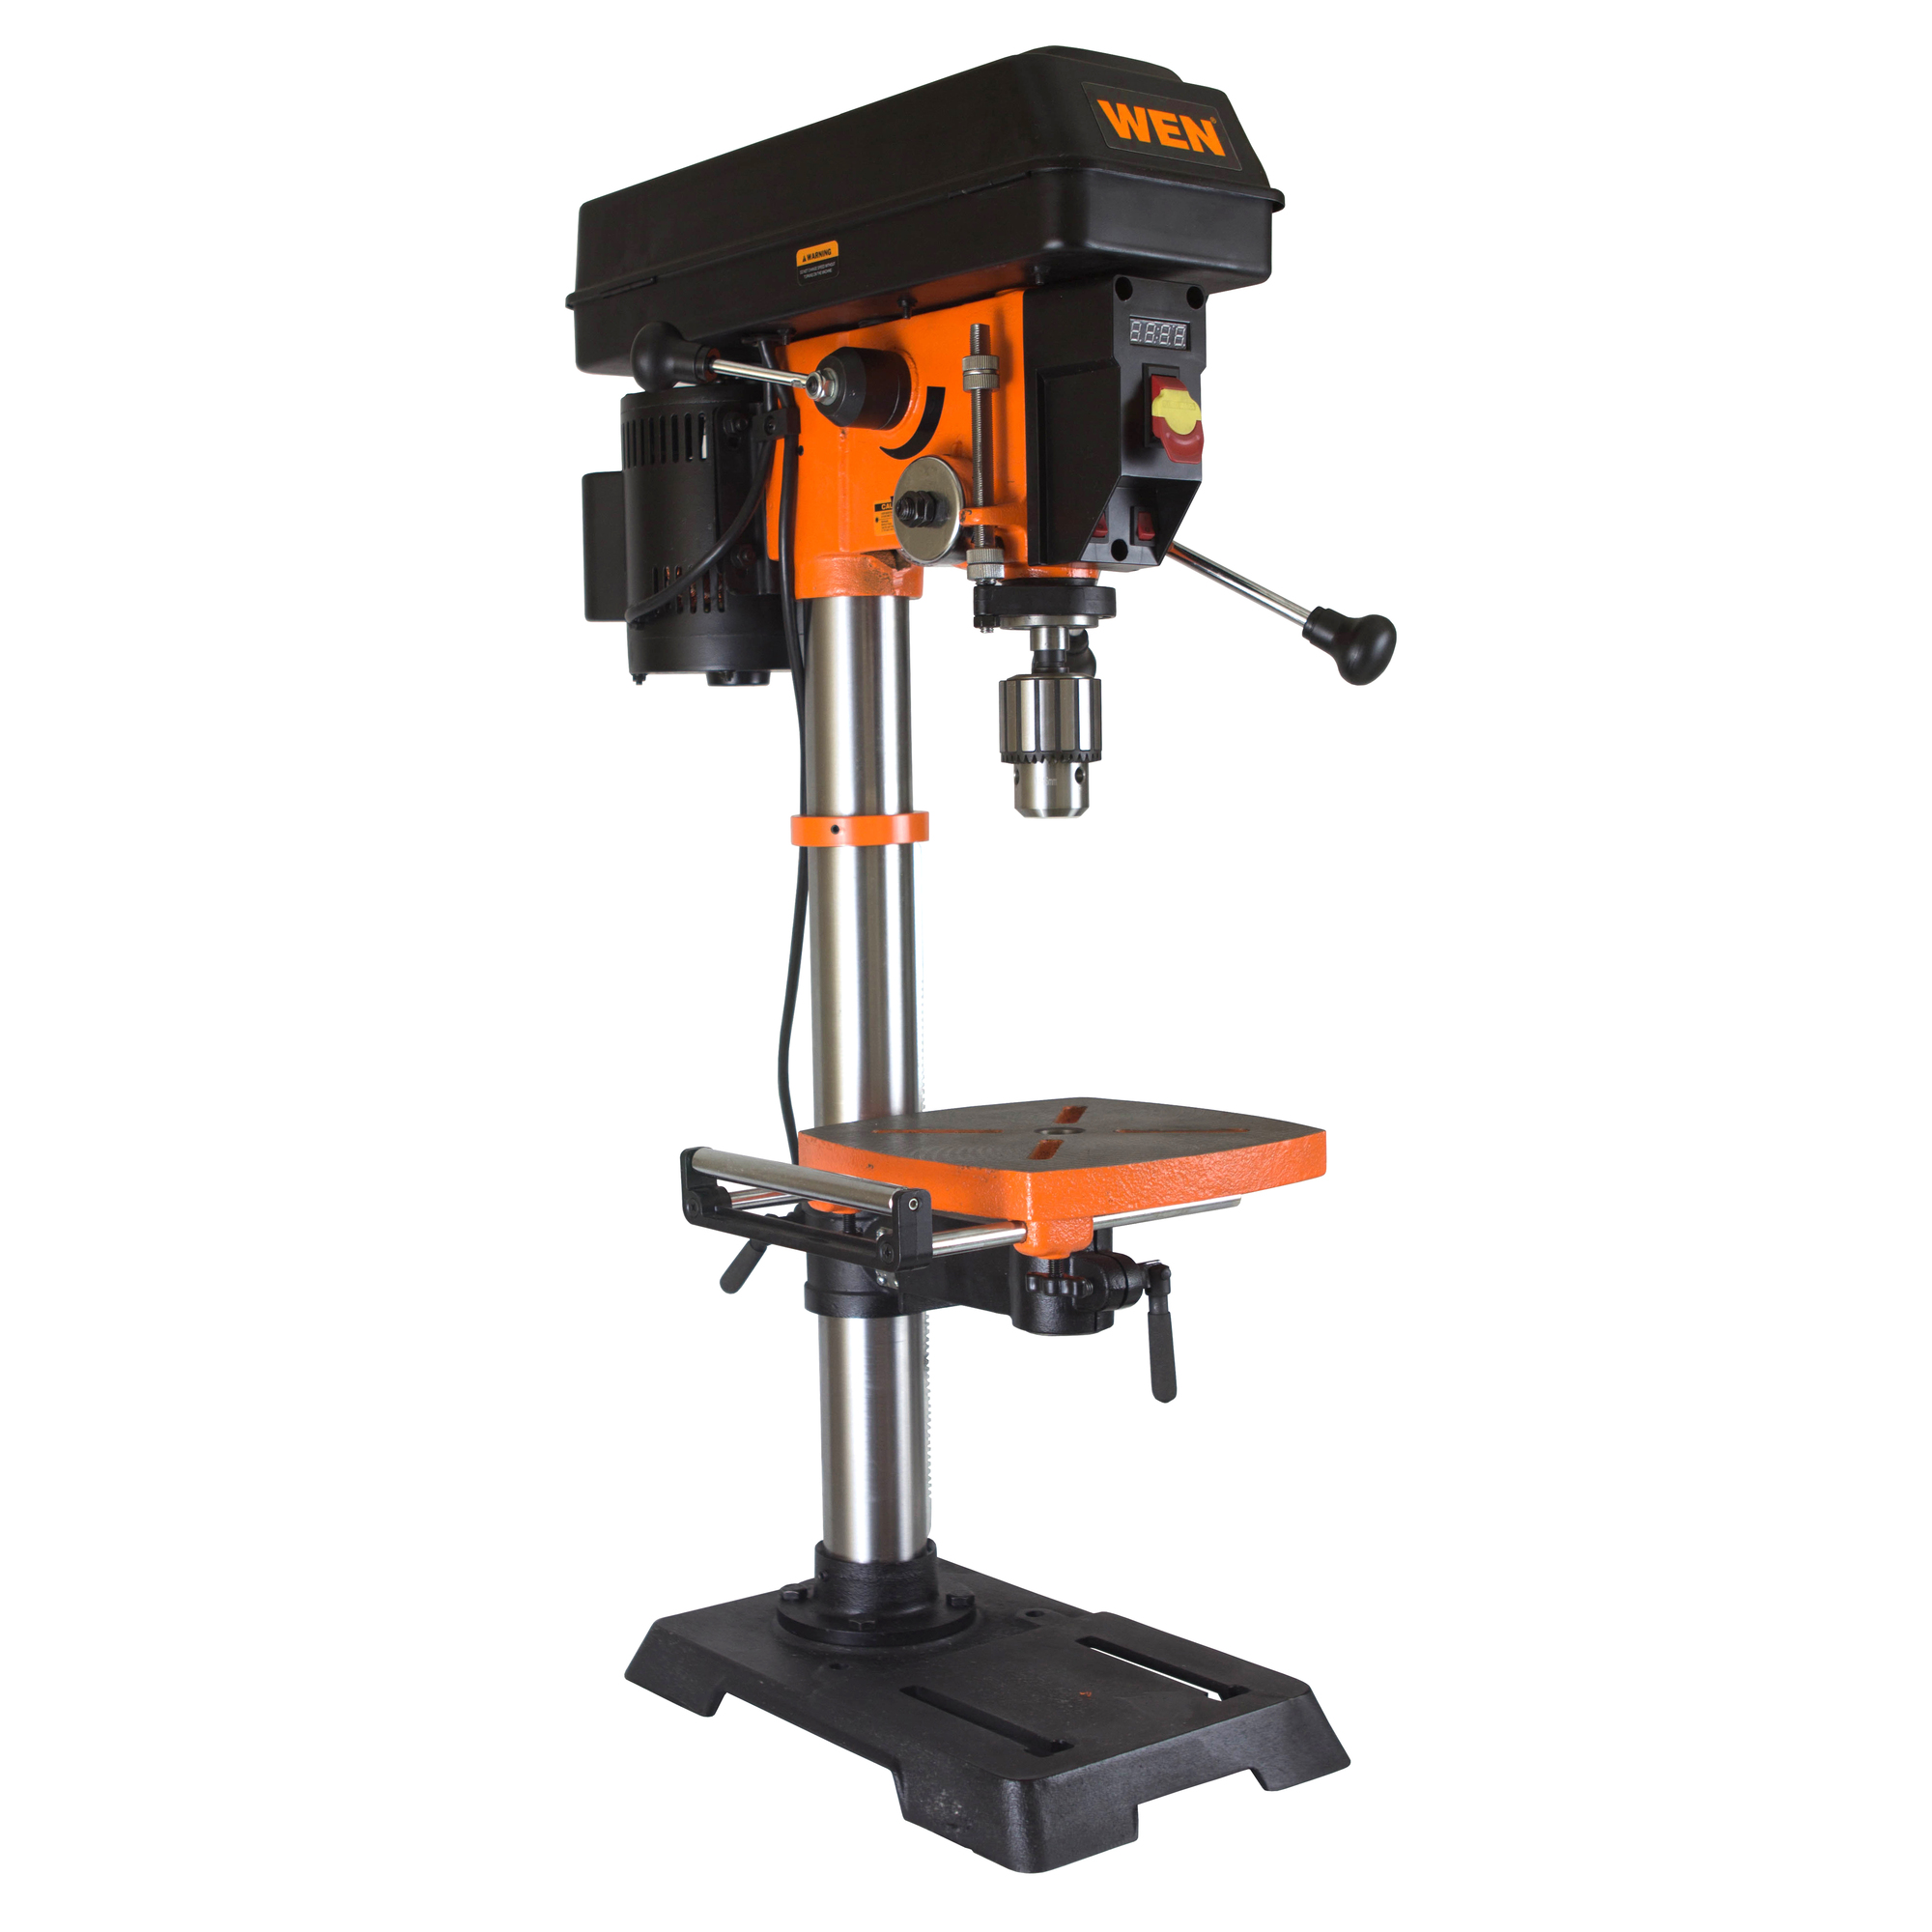 WEN, 12Inch Variable Speed Cast Iron Benchtop Drill Press, Chuck Size 0.625 in, Horsepower 0.8 Model 4214T